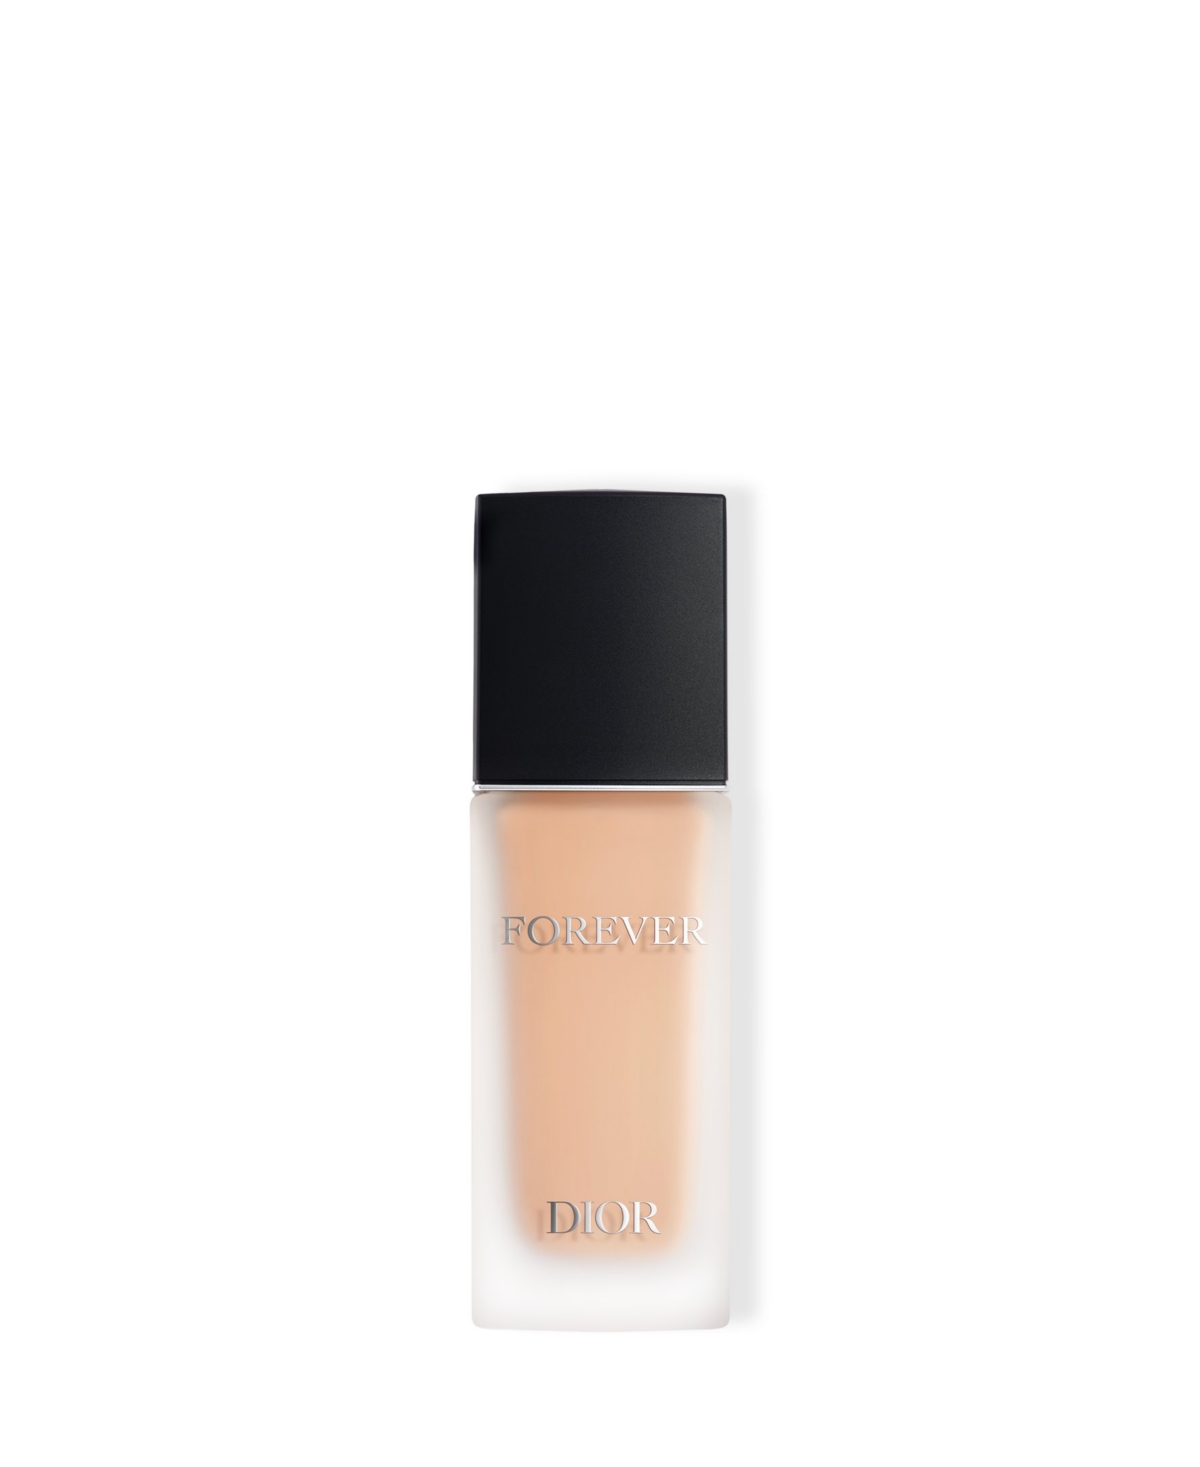 Dior Forever Matte Skincare Foundation Spf 15 In Cool (light To Medium Skin With Cool Und